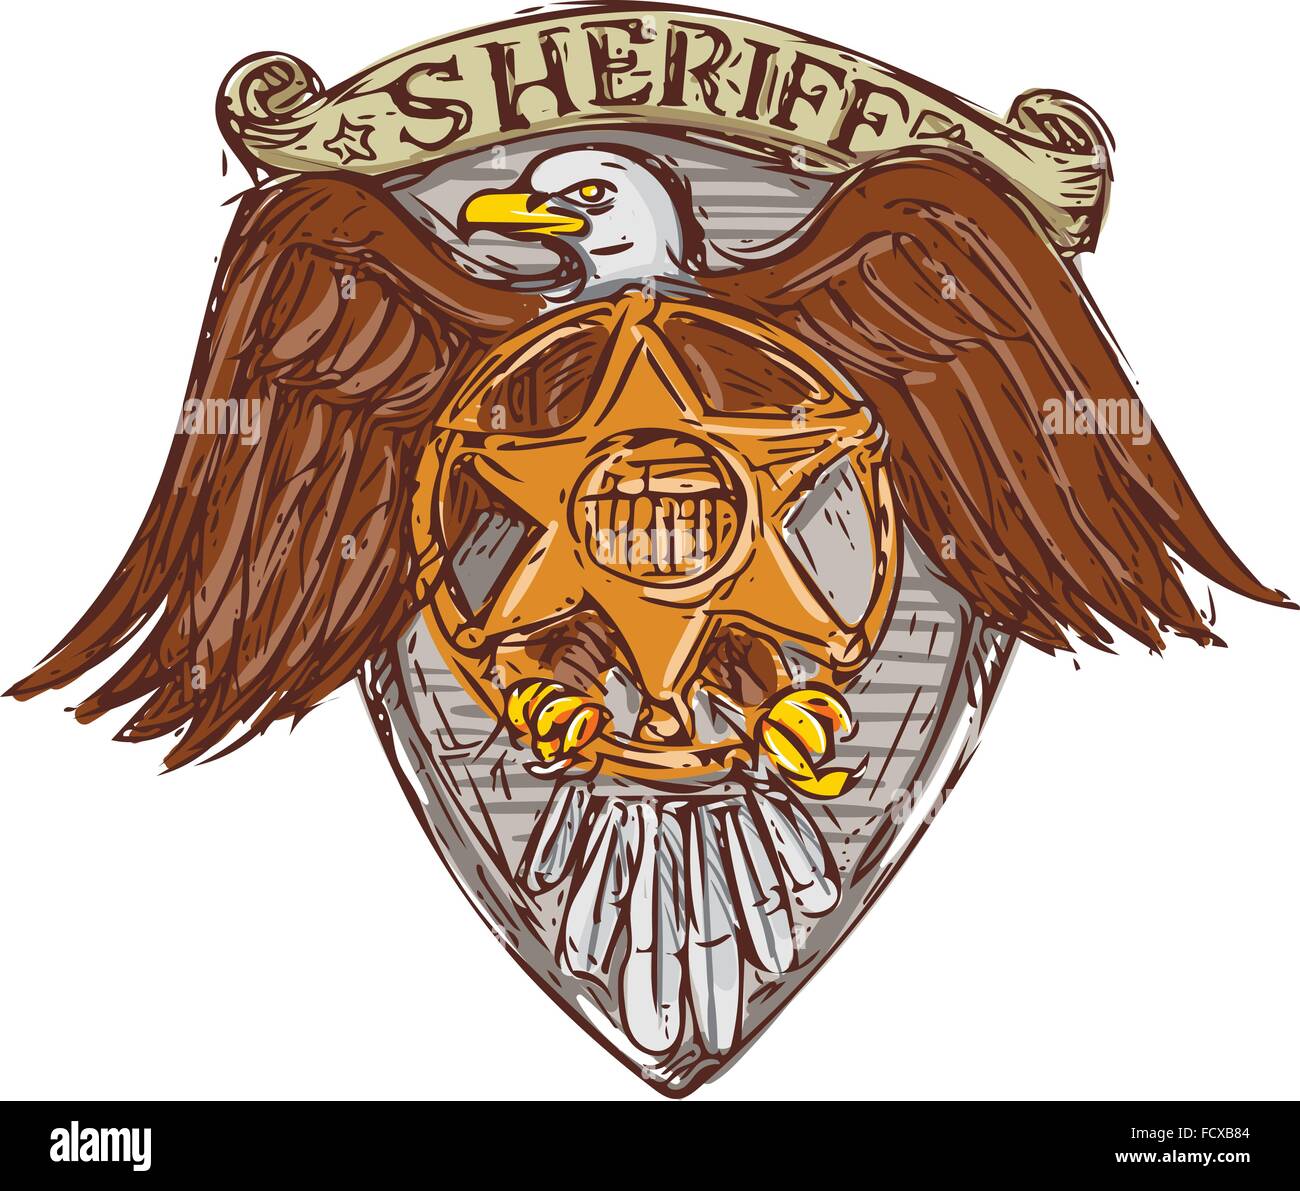 Drawing sketch style illustration of a sheriff badge with american eagle set inside shield on isolated background. Stock Vector